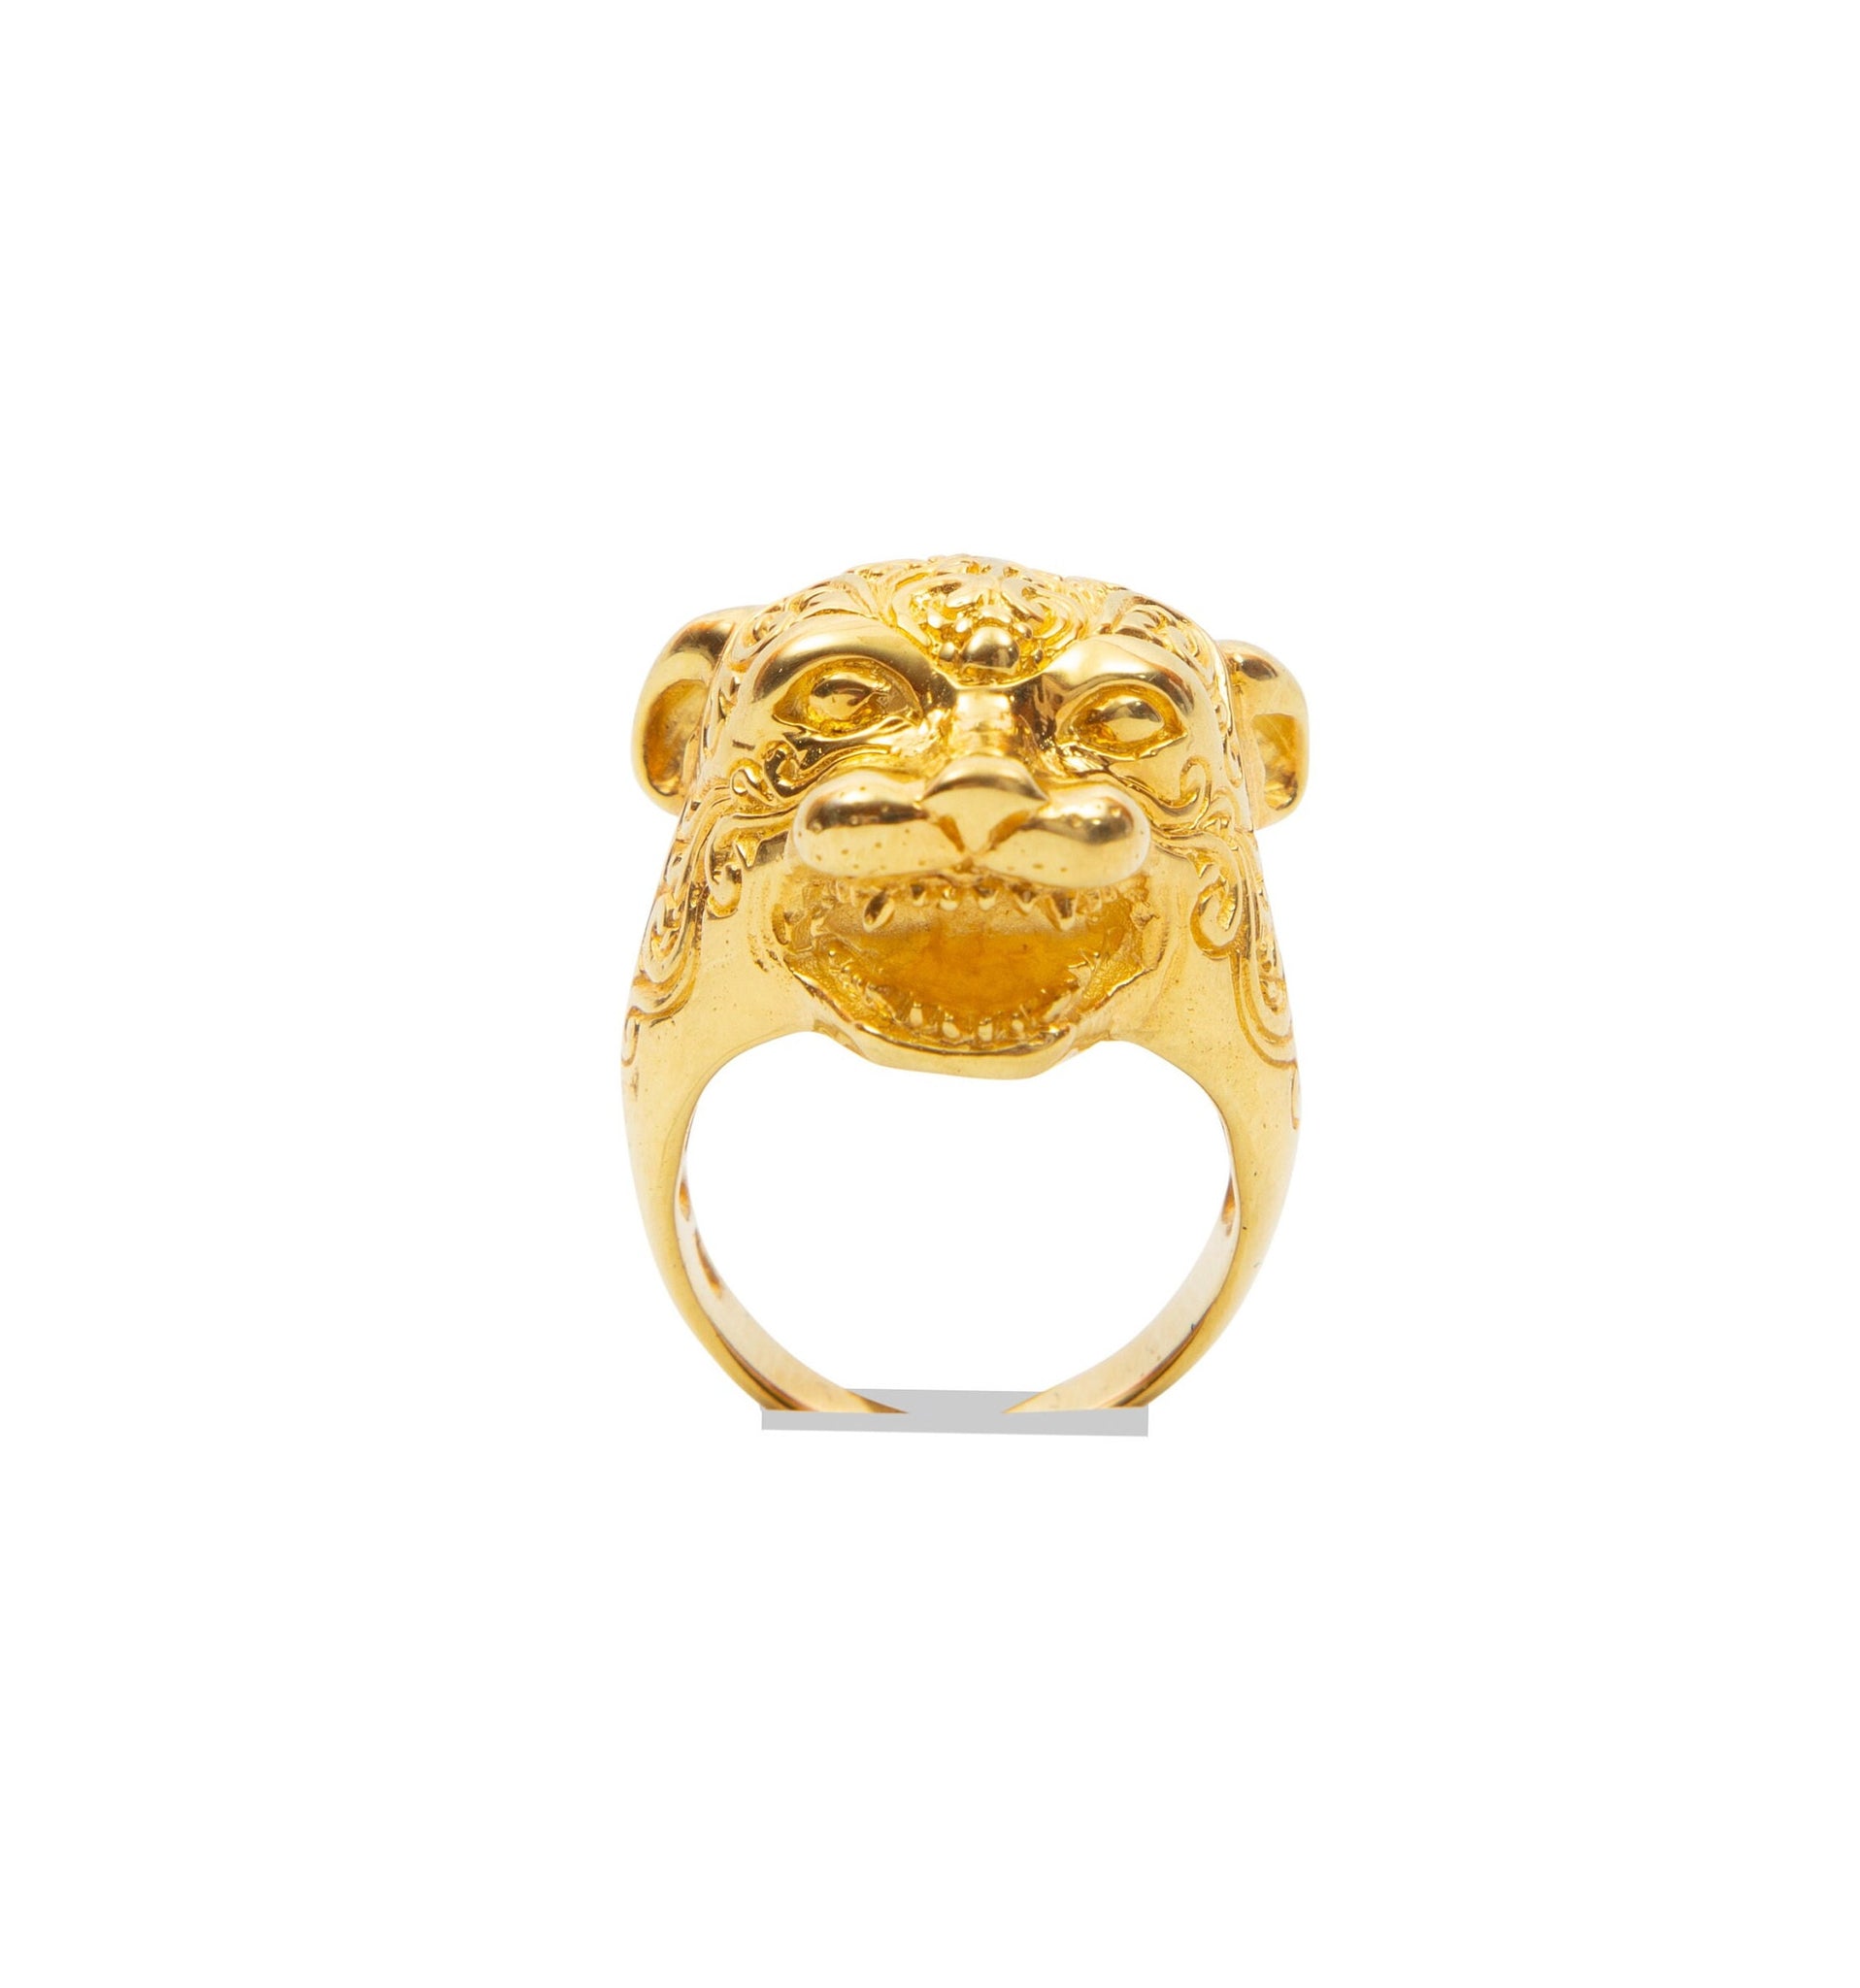 Tiger ring silver ring gold printable jewelry 3D model 3D model 3D  printable | CGTrader